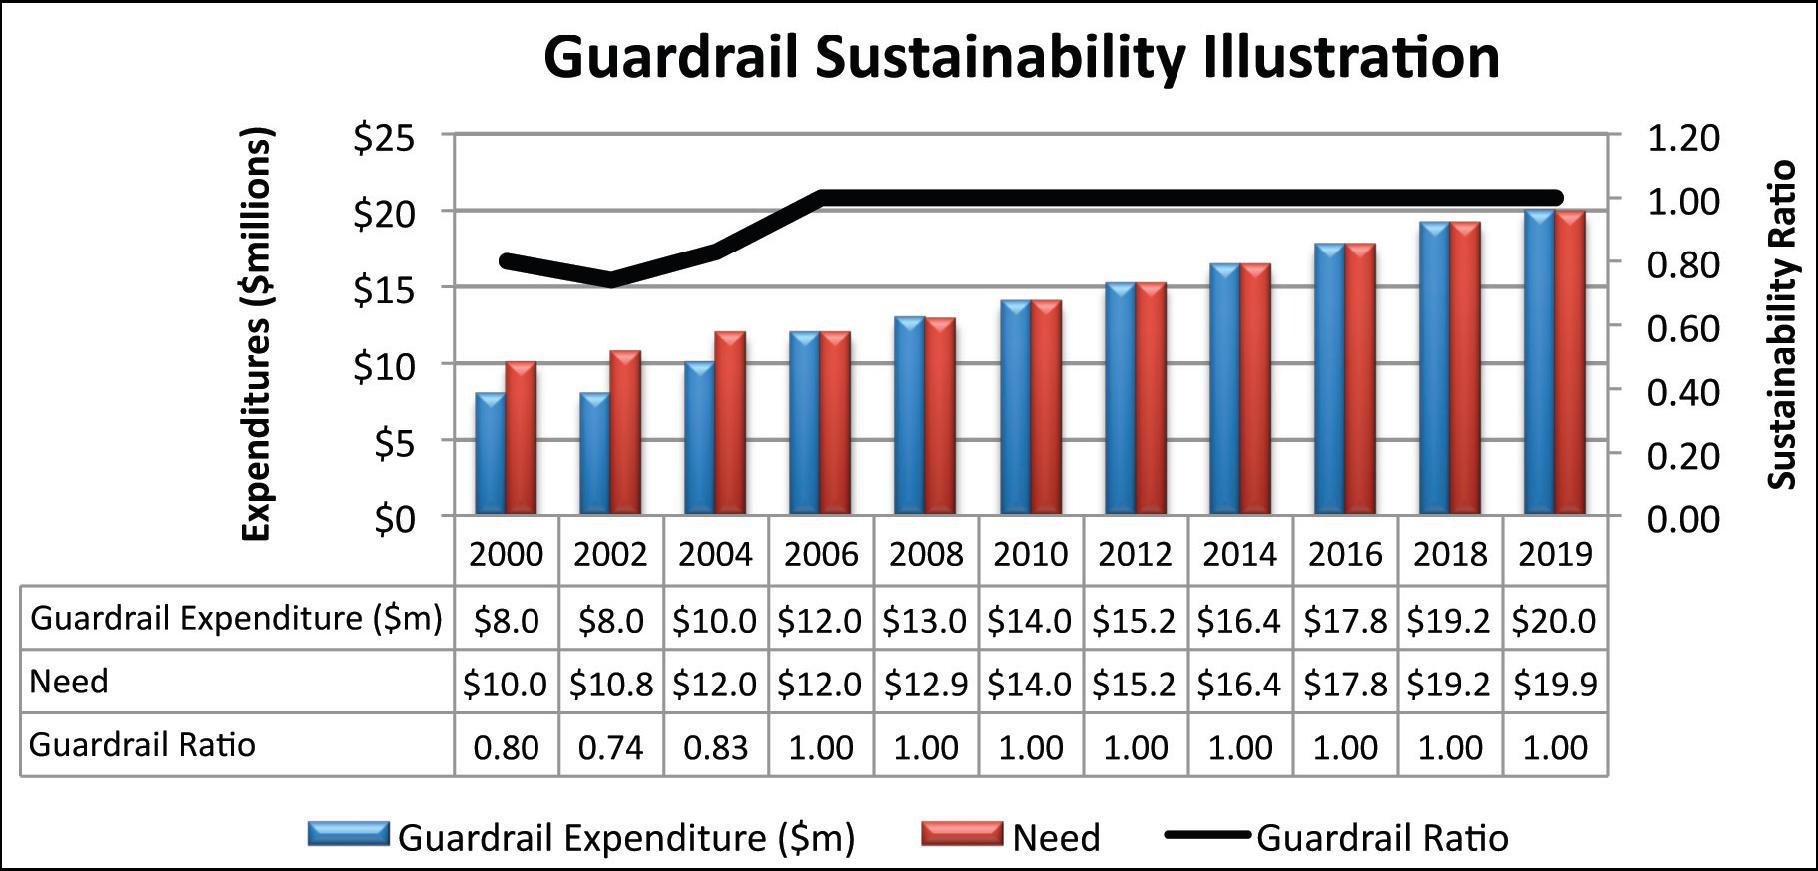 Figure 8  illustrates that expanding the time series to include more years of guardrail expenditure allows a long-term perspective on the necessary investment. Figure 8 illustrates that if budget year 2011 serves as the current year in which a guardrail budget is to be evaluated that the past expenditure and condition data illustrate the consequences of past investment decisions. Between 2000 and 2005, guardrail investment was inadequate, conditions declined and investment had to substantially increase to correct the backlog.  However, after 2005 investment was adequate each year and guardrail conditions repeatedly achieved a sustainability ratio of one point zero, which is optimum.